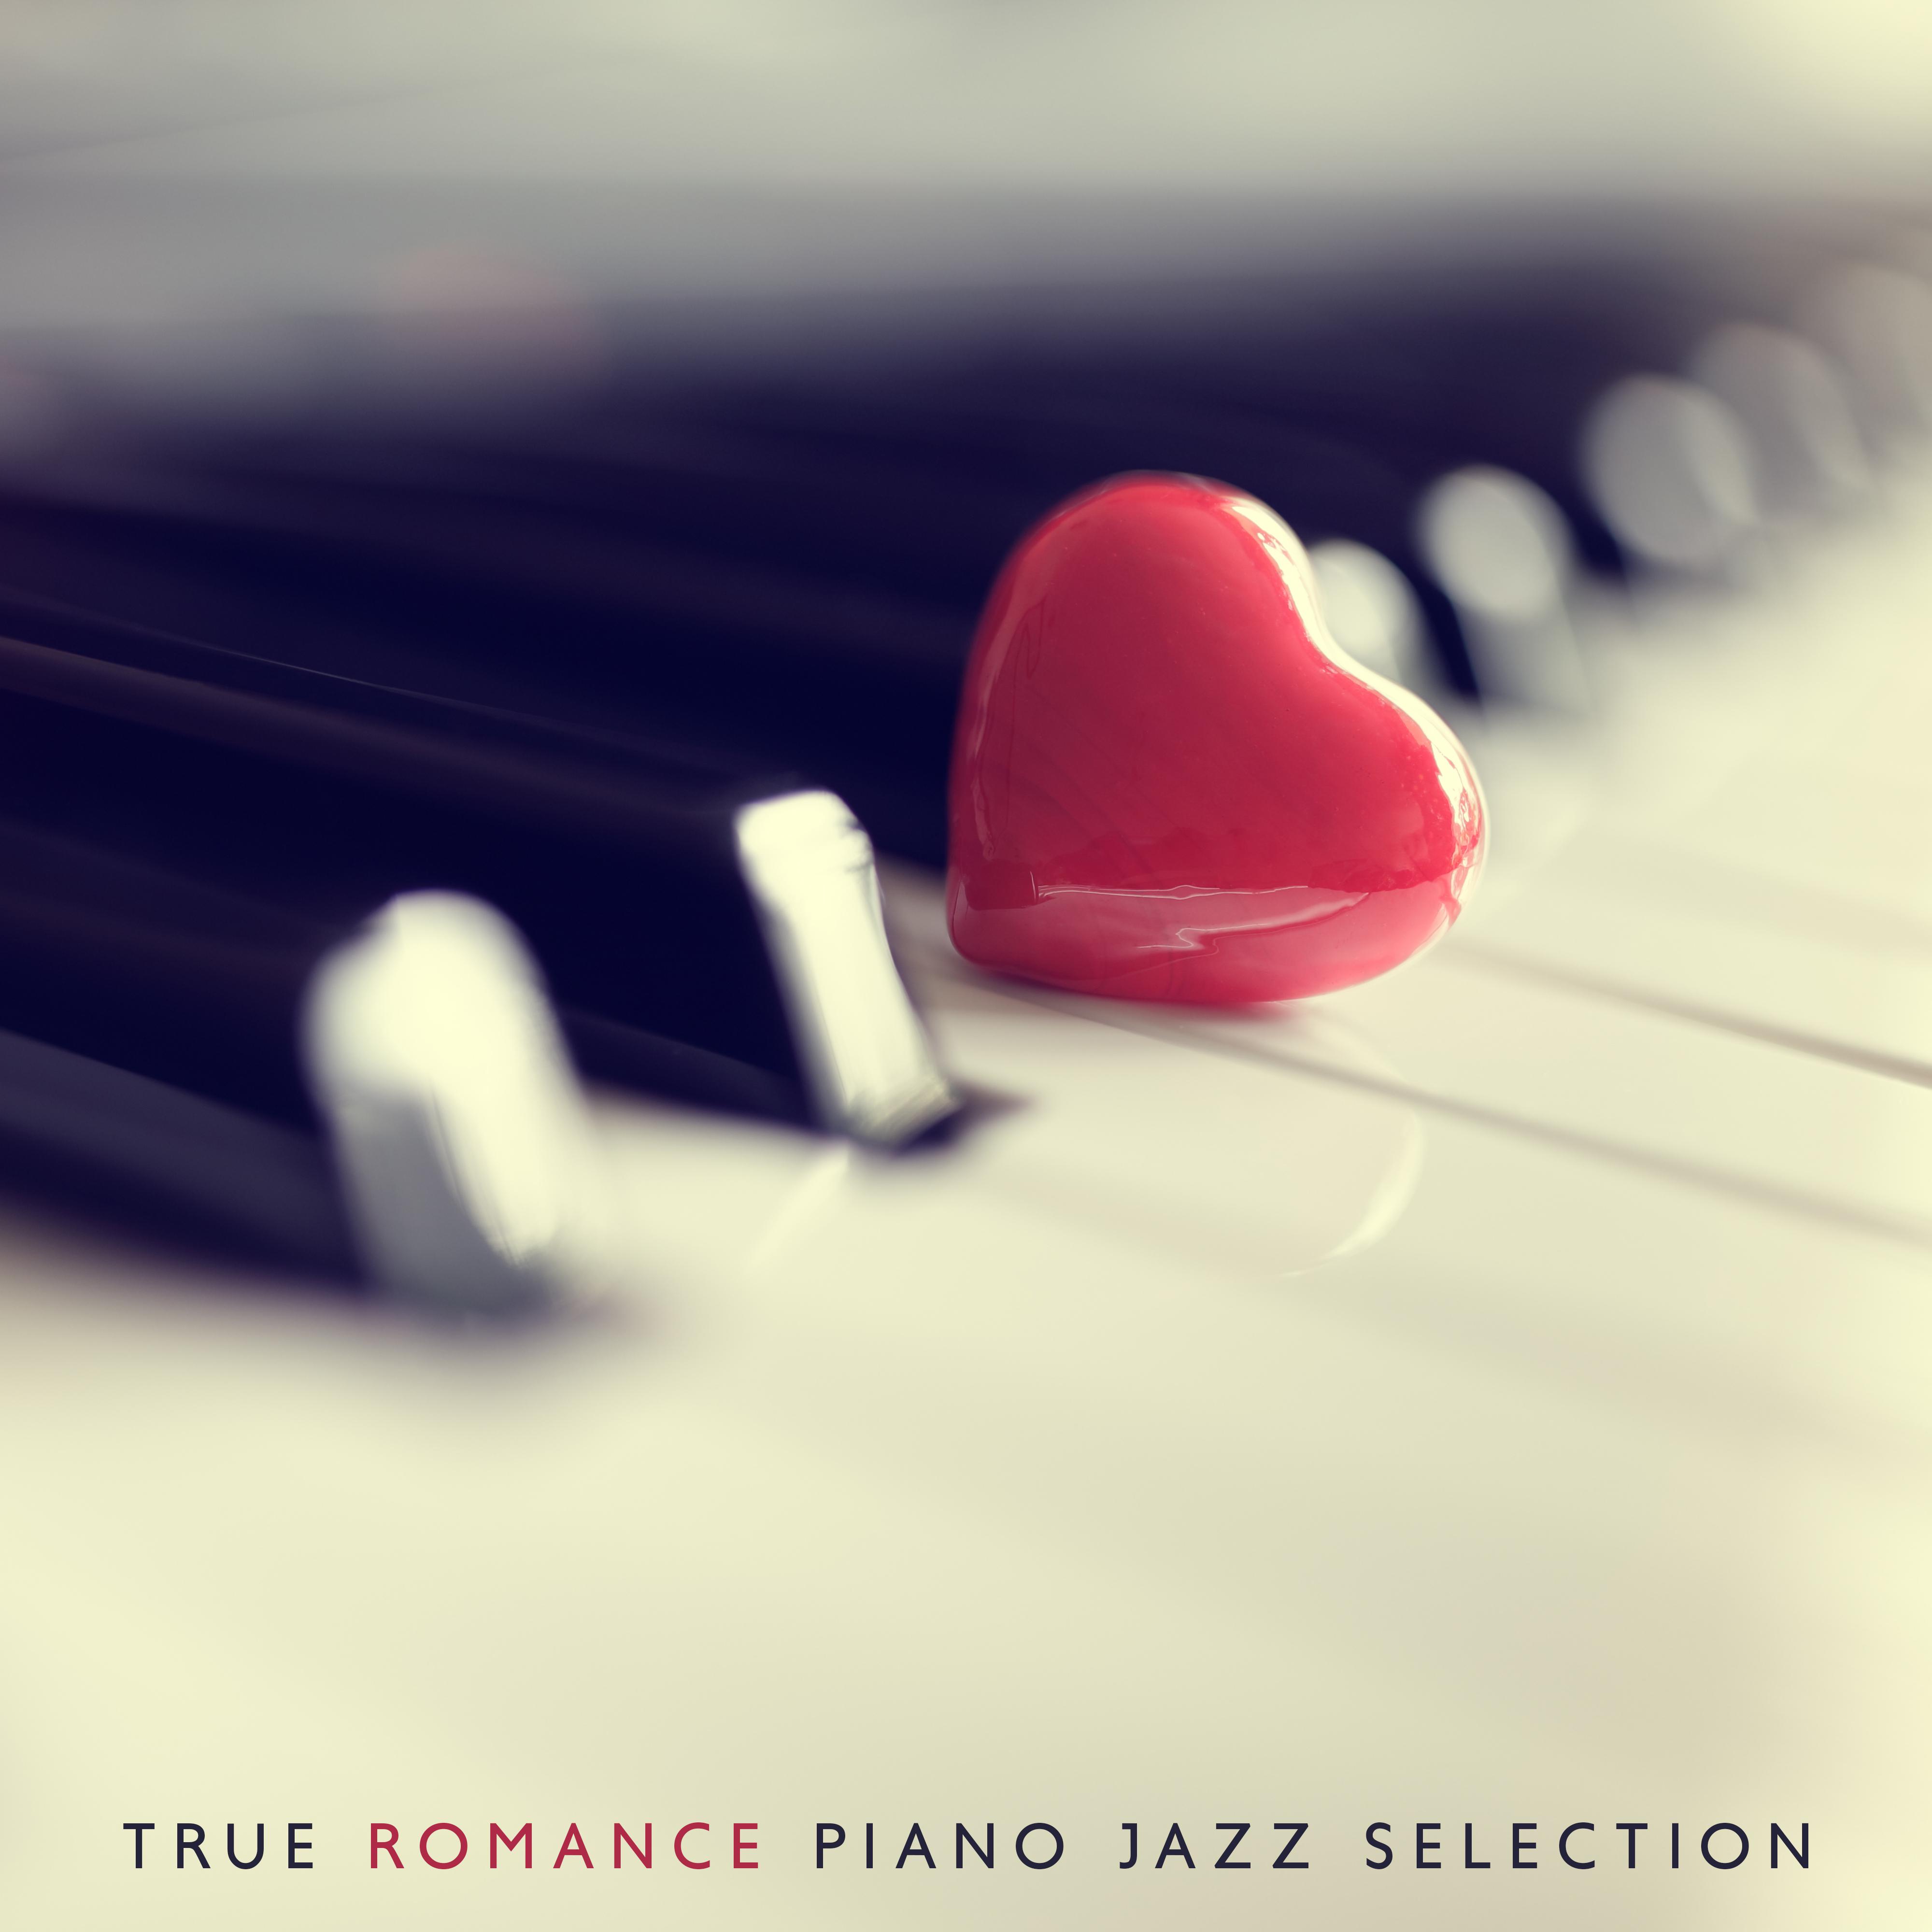 True Romance Piano Jazz Selection: 2019 Vintage Piano Music with Other Instruments, Sounds Perfect fo Romantic Meeting & Dinner, Spending Nice Time with Love